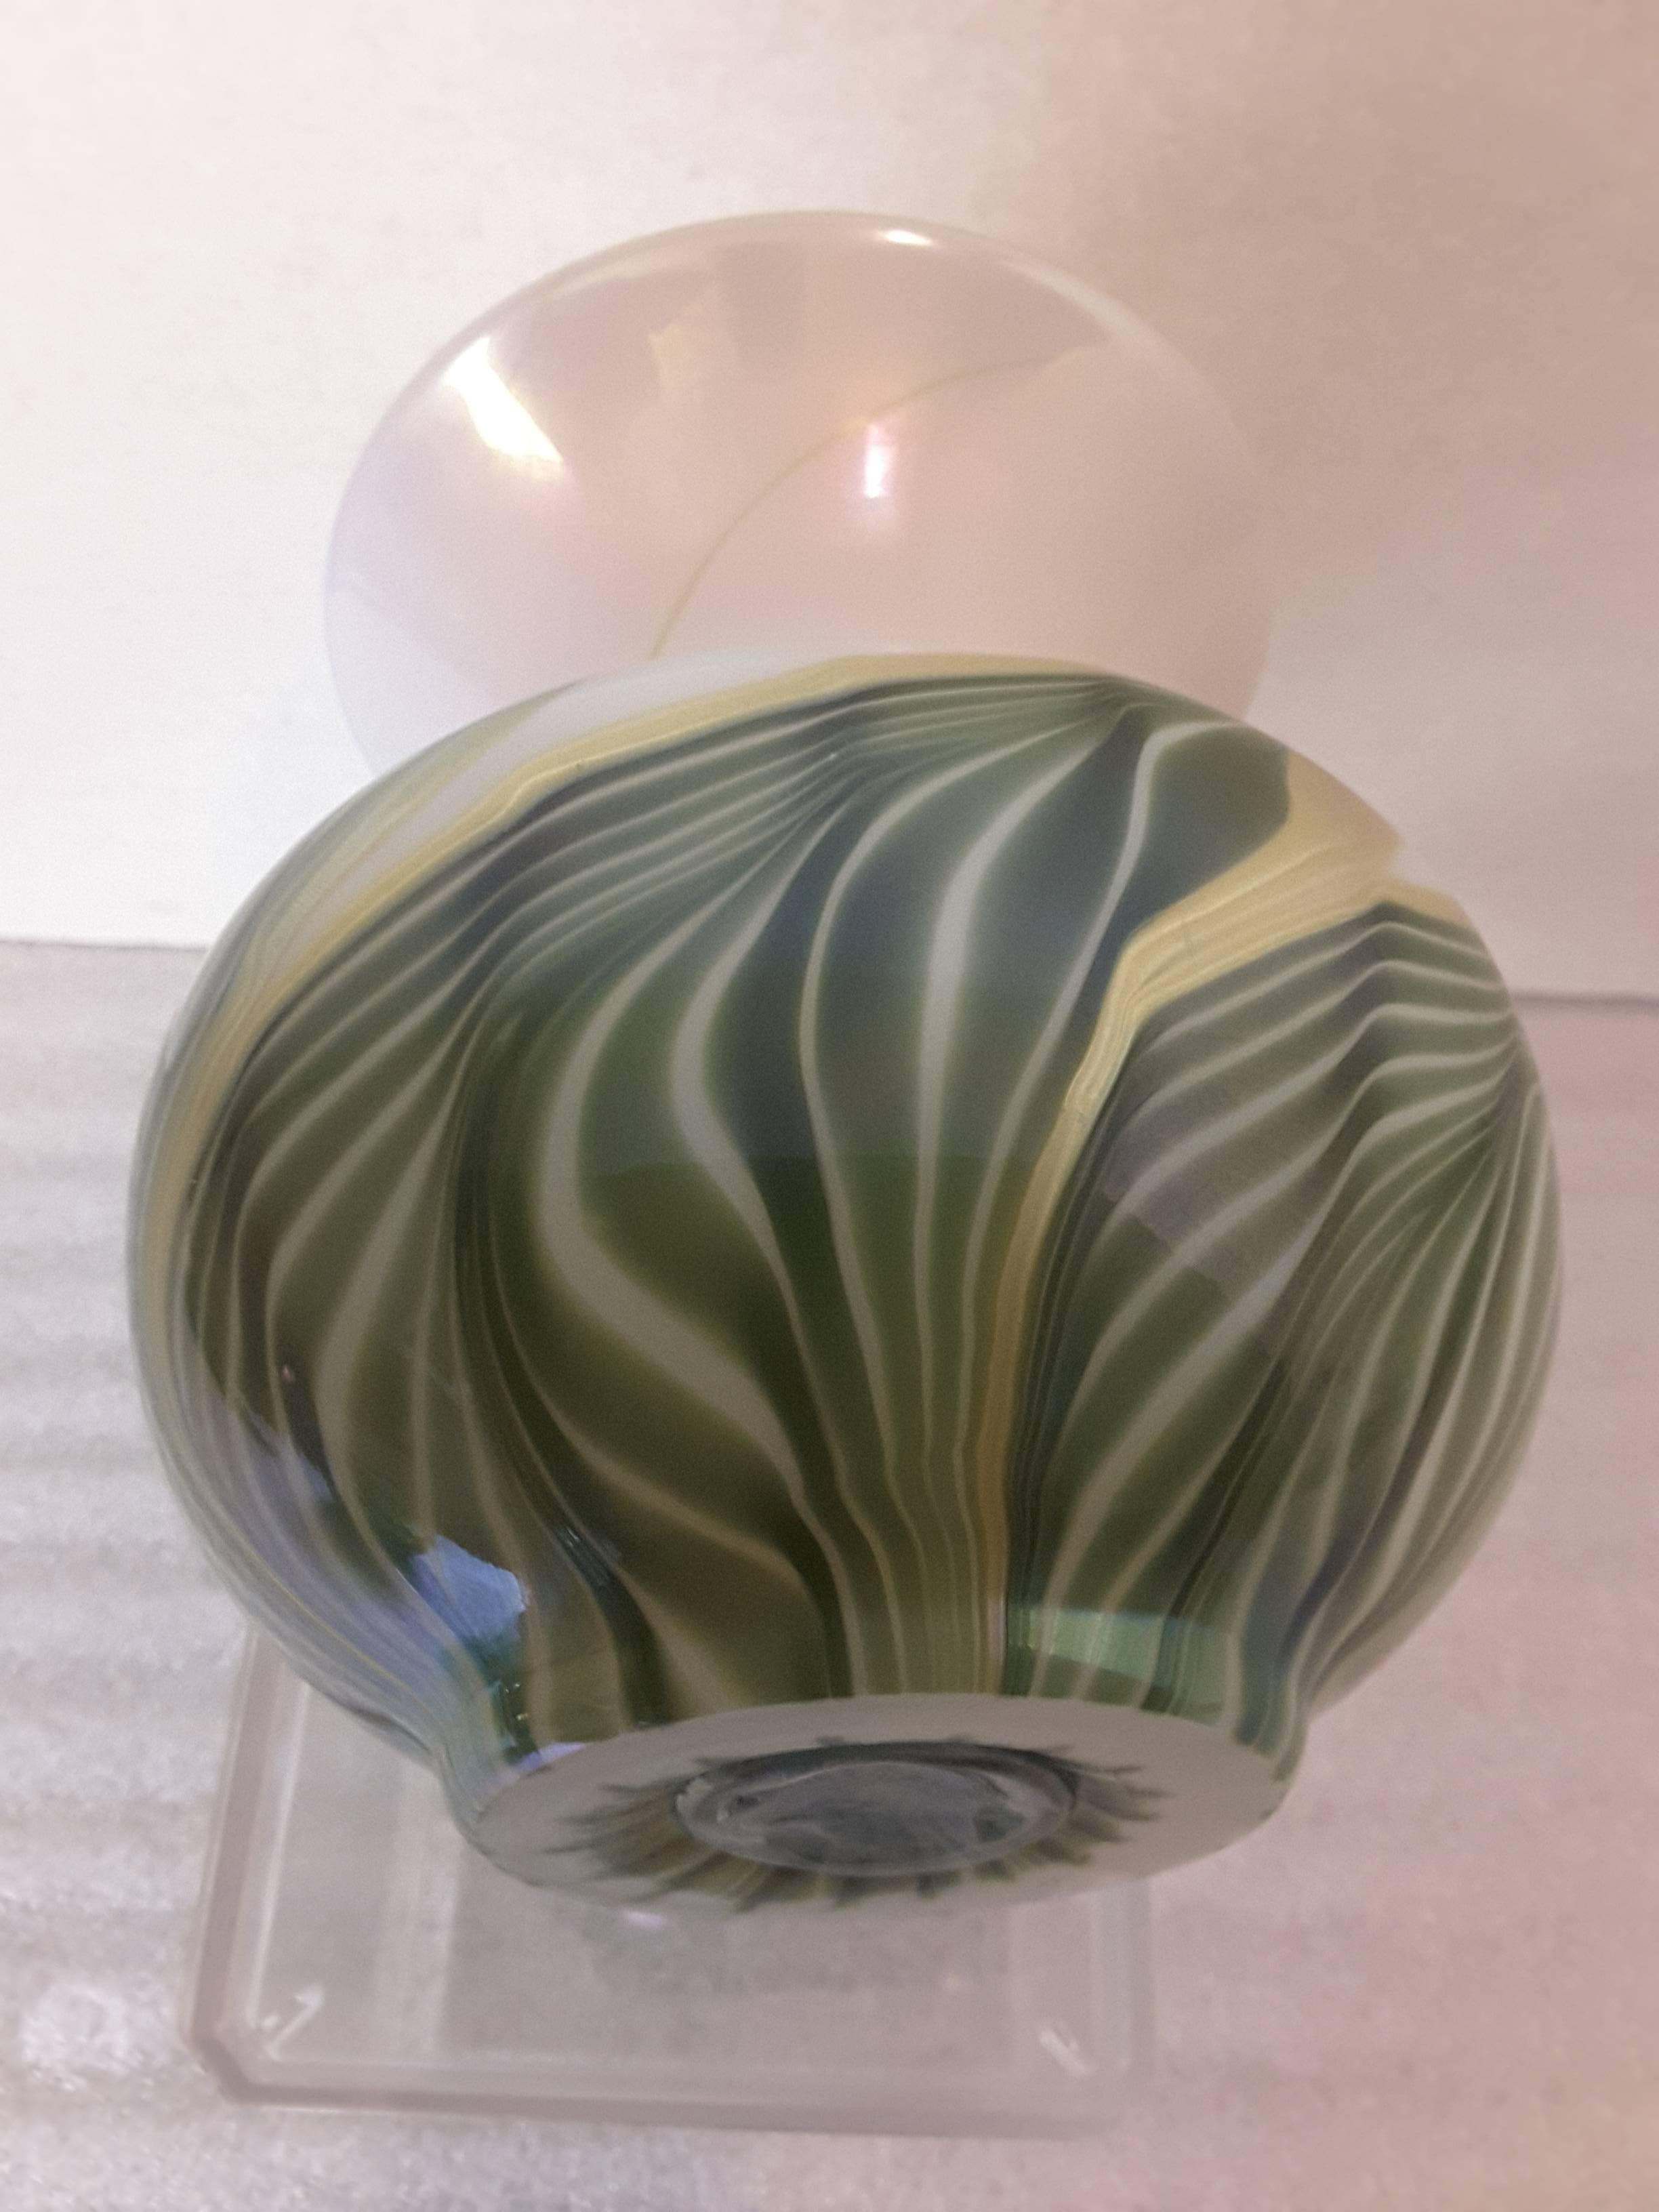 20th Century Pulled Feather Art Glass Vase in White, Green and Iridescent Gold Interior